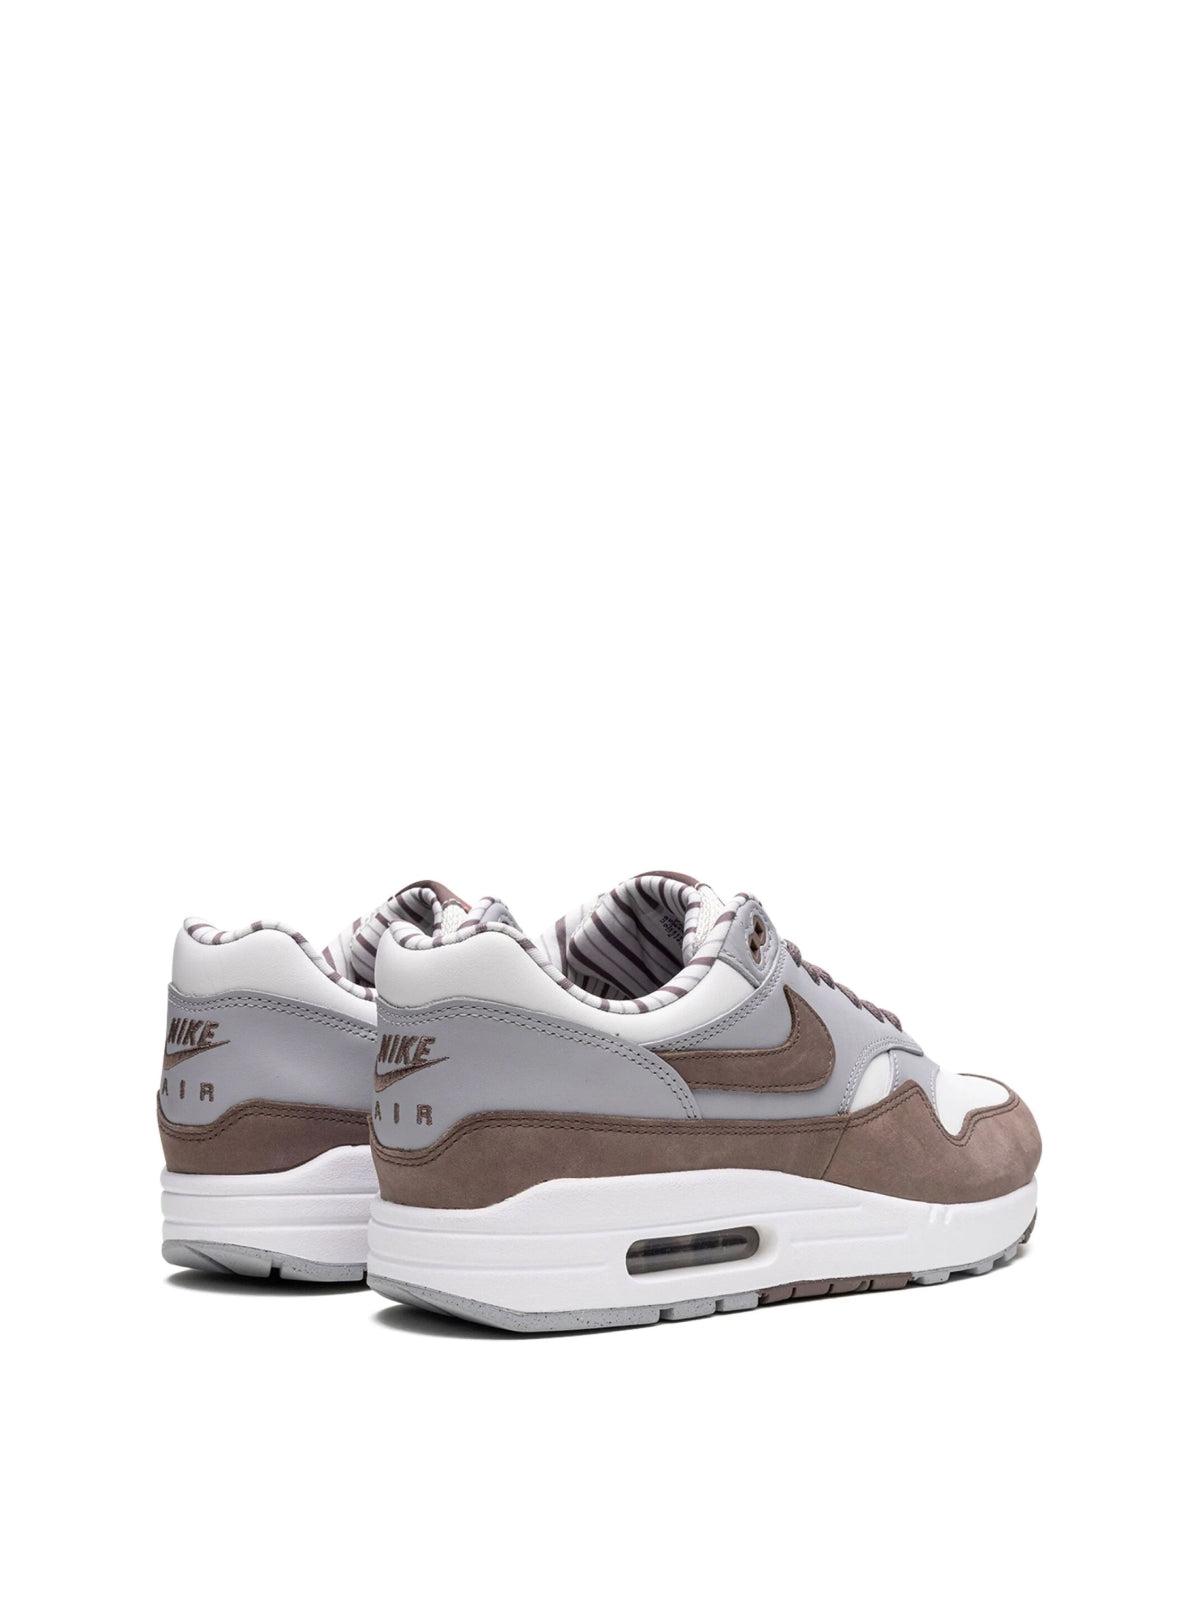 Nike-OUTLET-SALE-Air Max 1 PRM "Shima Shima" Sneakers-ARCHIVIST